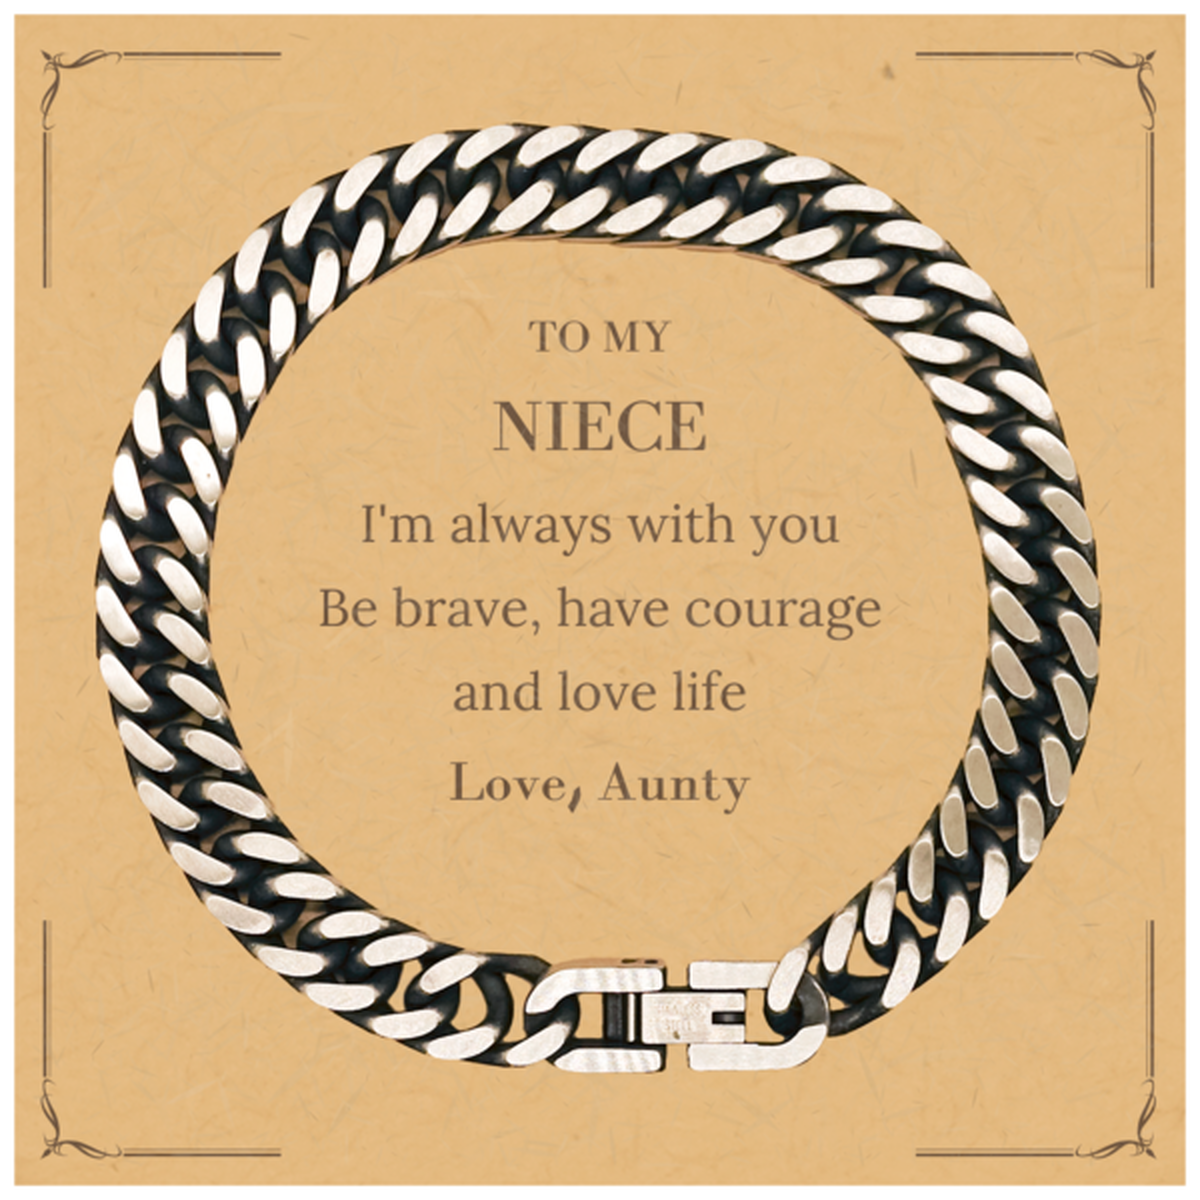 To My Niece Gifts from Aunty, Unique Cuban Link Chain Bracelet Inspirational Christmas Birthday Graduation Gifts for Niece I'm always with you. Be brave, have courage and love life. Love, Aunty